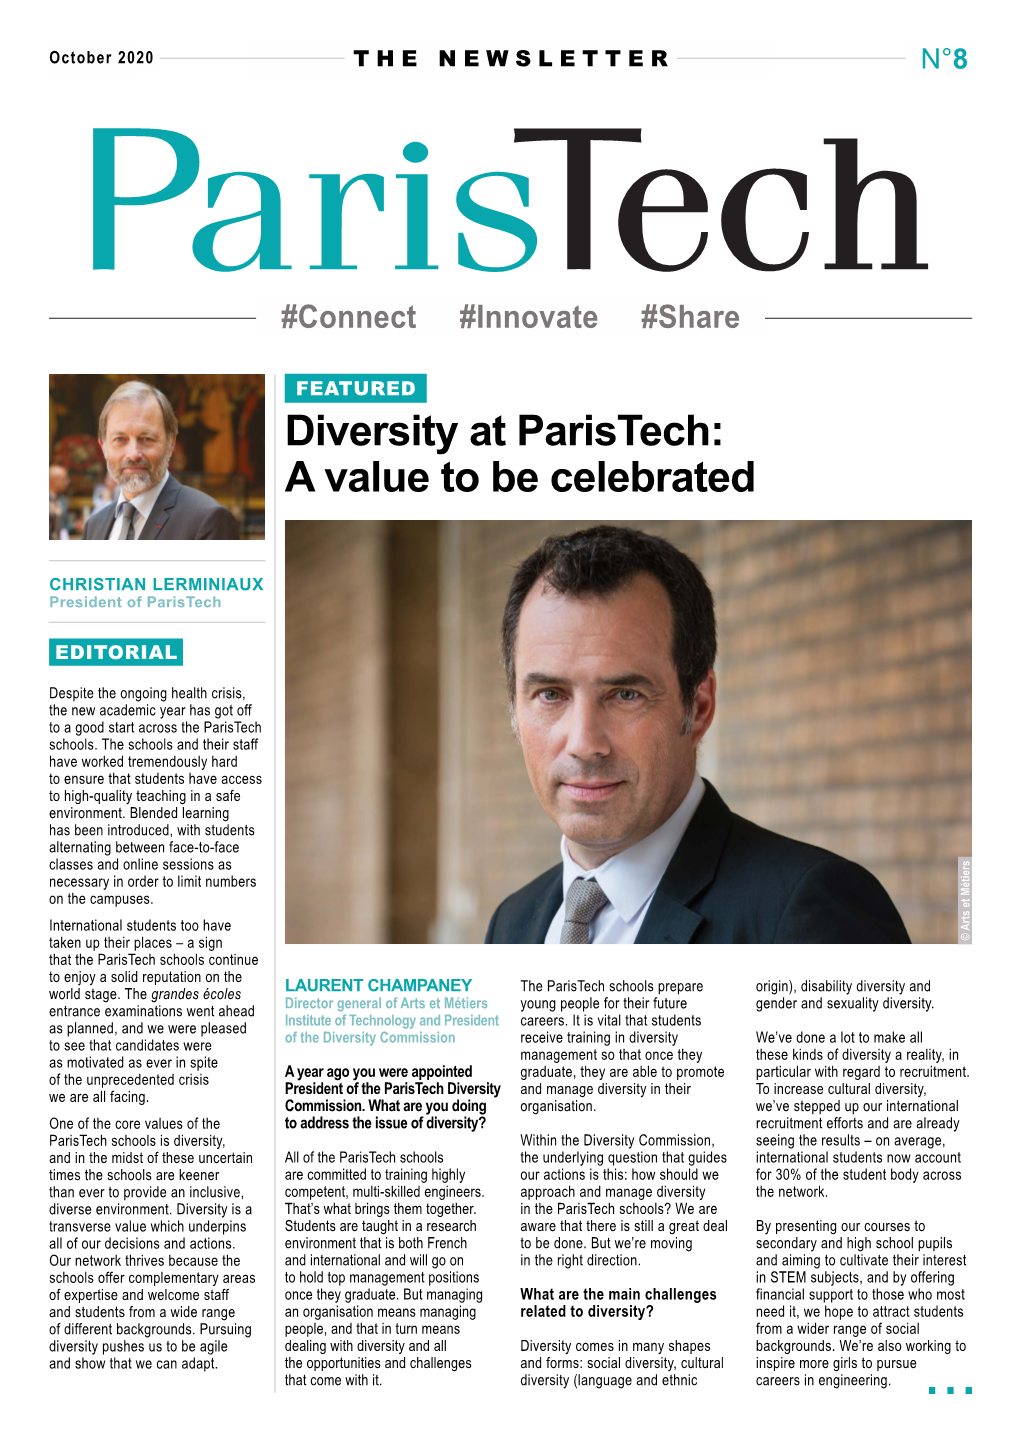 Diversity at Paristech: a Value to Be Celebrated